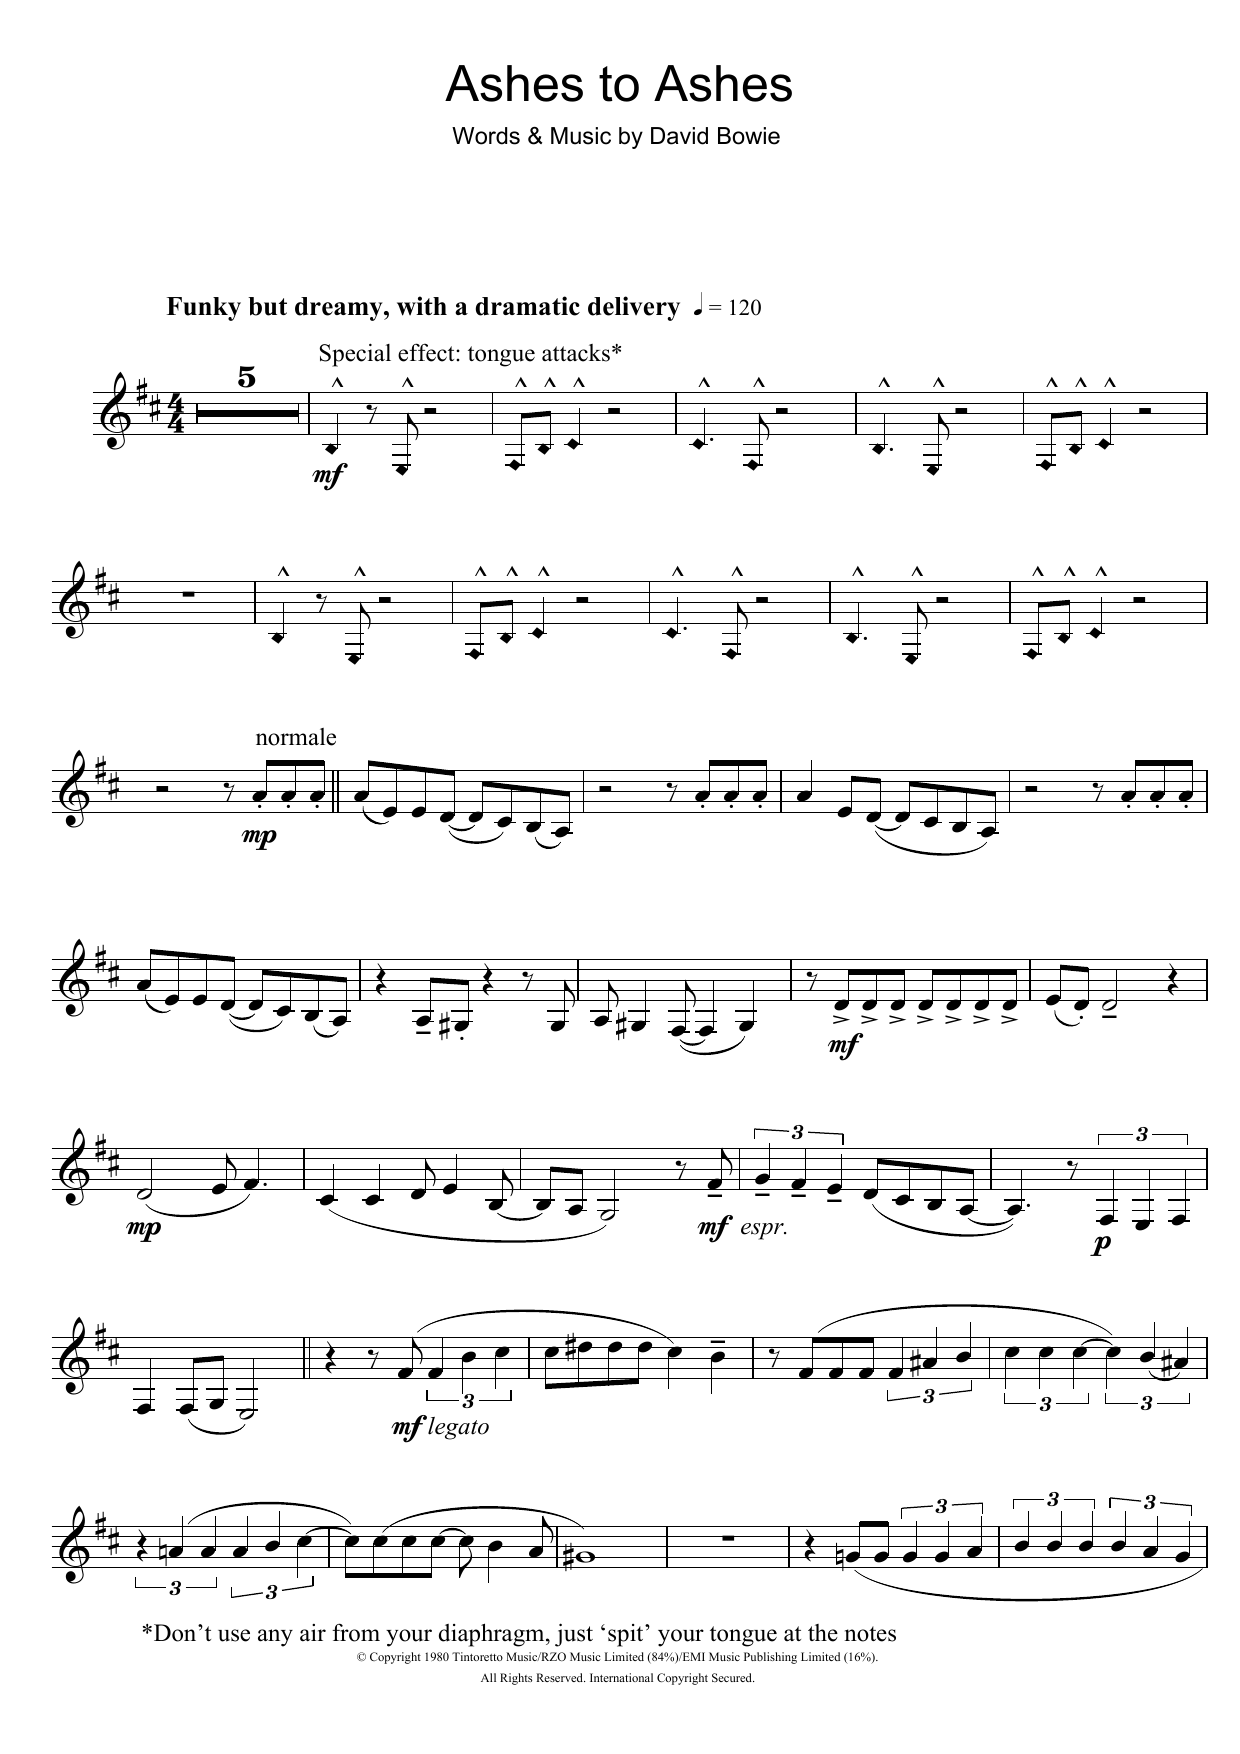 Download David Bowie Ashes To Ashes Sheet Music